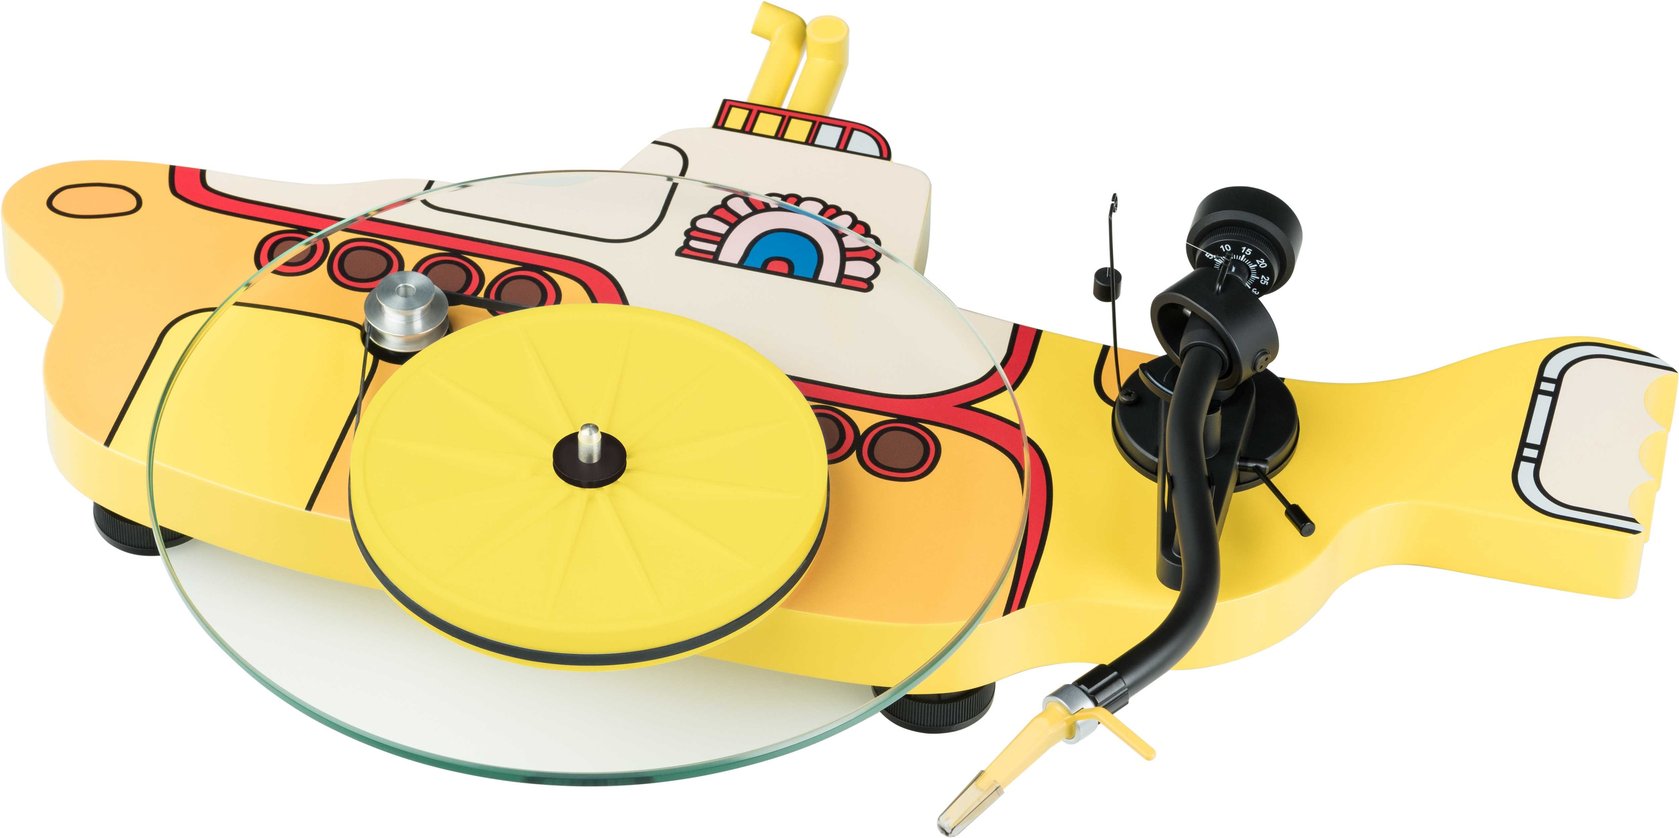 Pro-ject The Beatles The Yellow Submarine